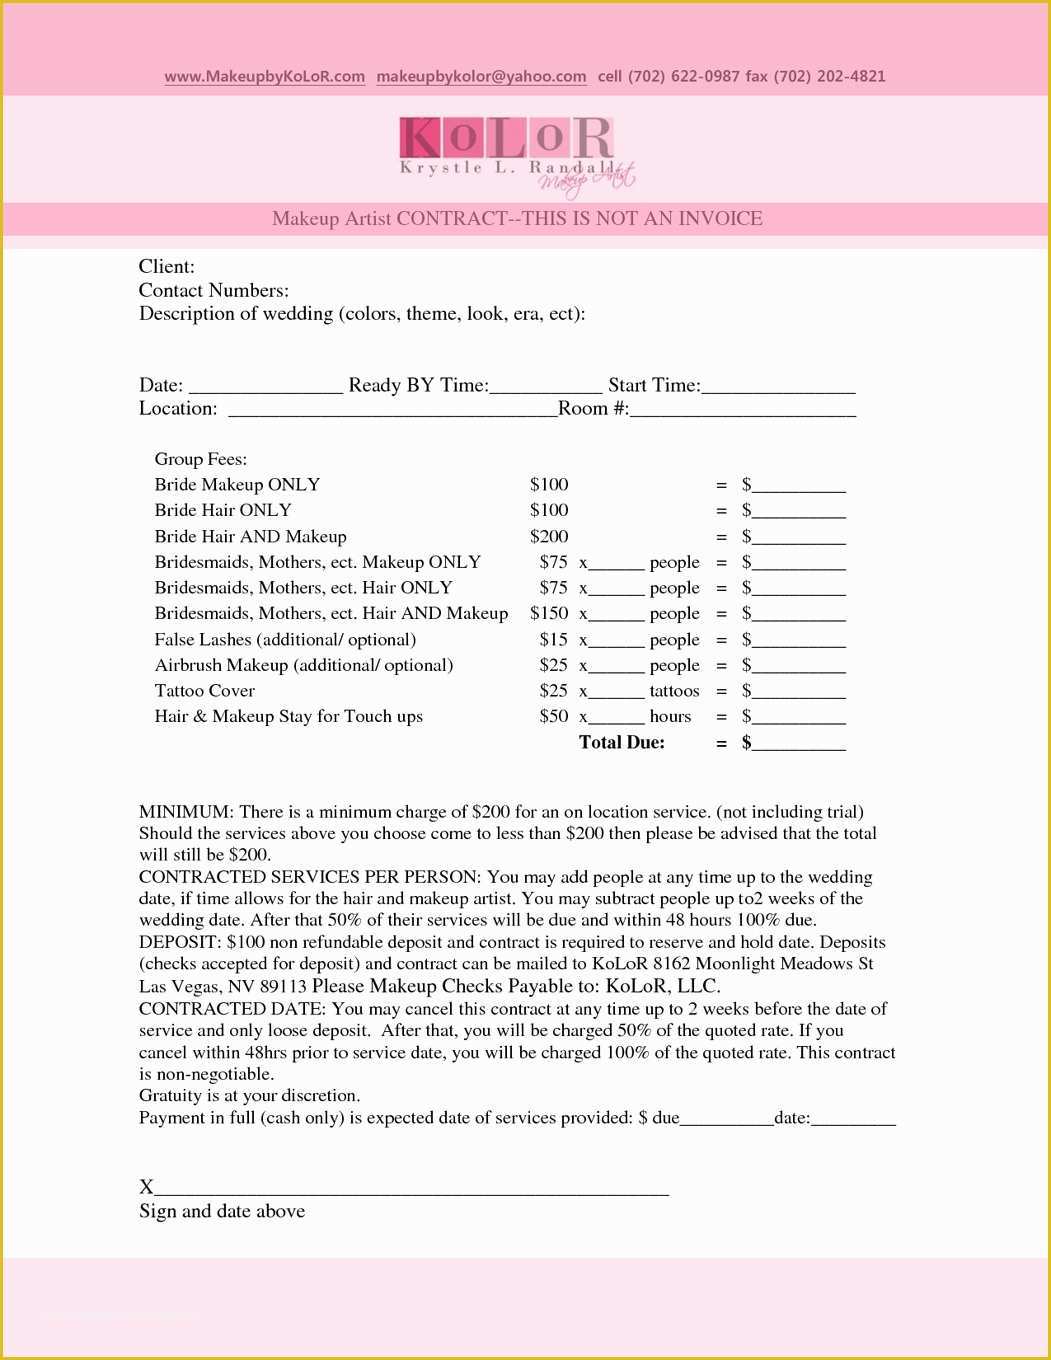 Artist Booking form Template Free Of Makeup Artist Contract Template Free Templates Resume